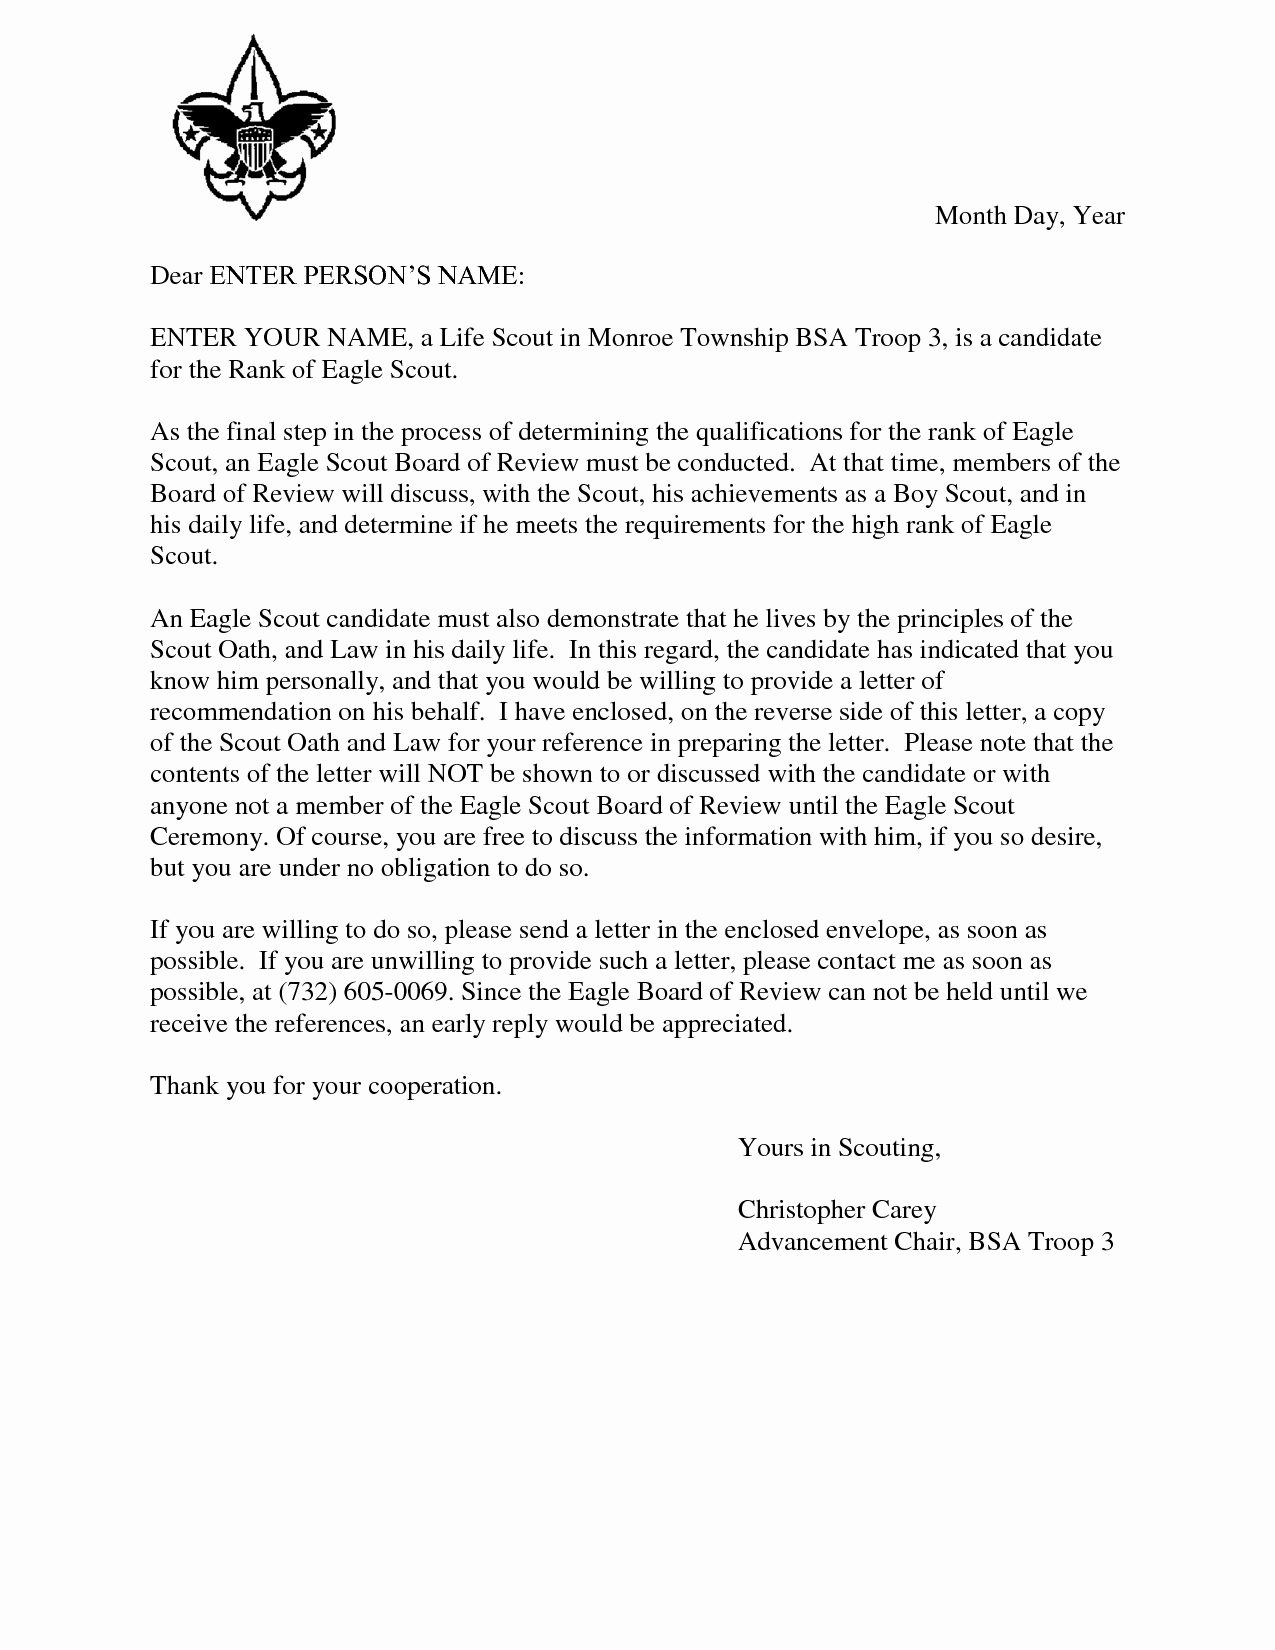 Boy Scout Letter Of Recommendation Best Of Eagle Scout Reference Request Sample Letter Doc 7 by